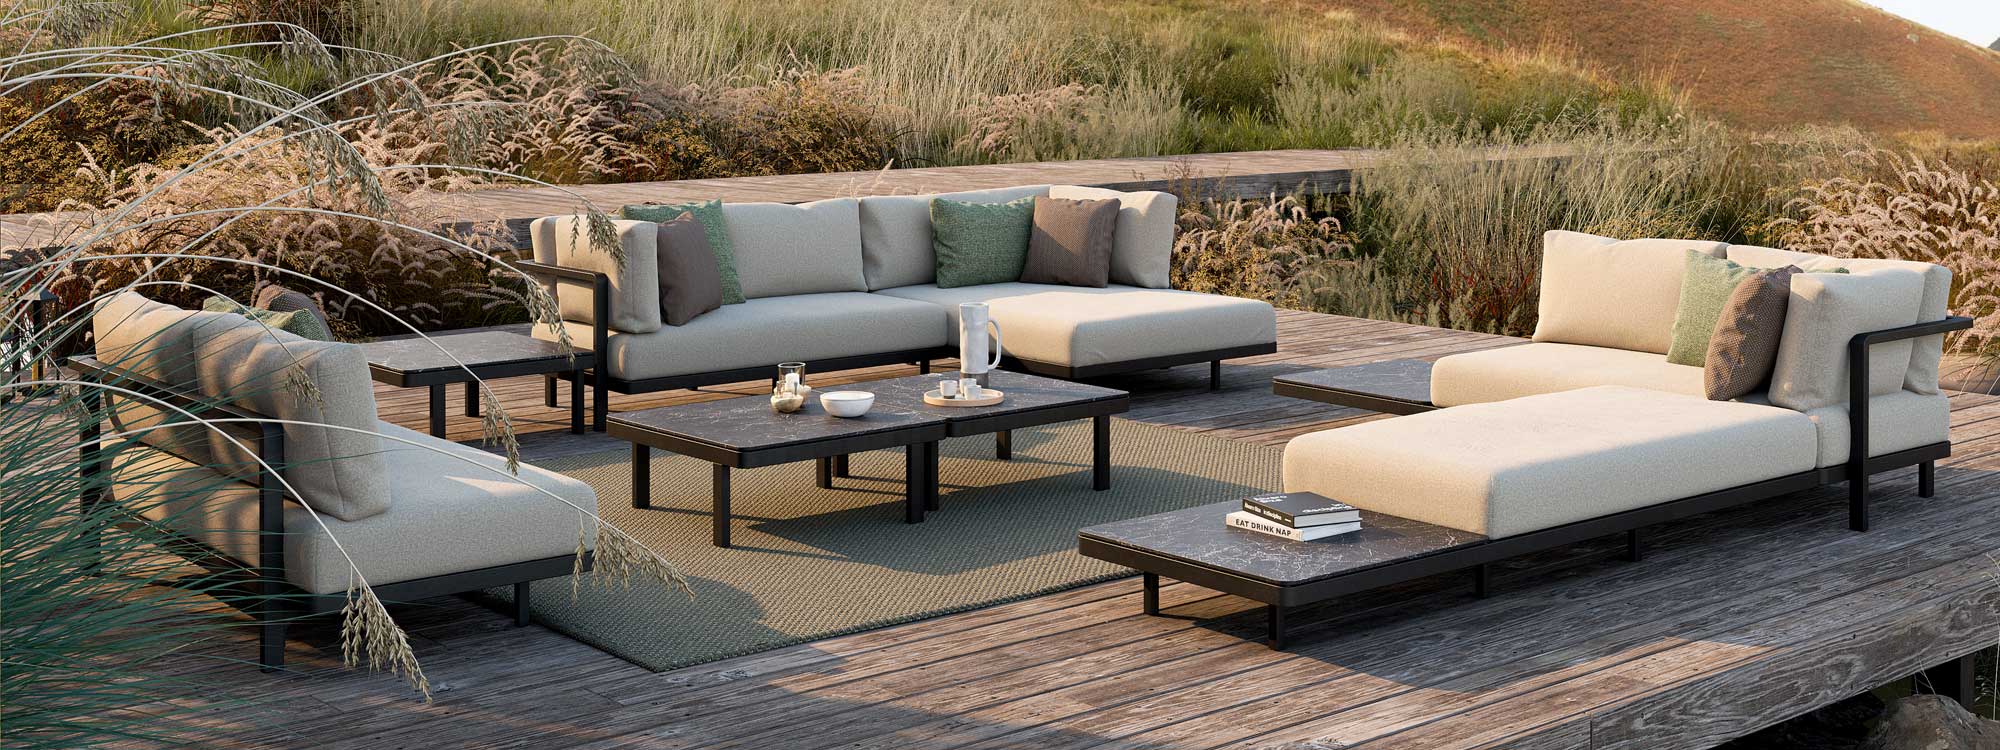 Image of pair of Alura Lounge modern outdoor corner sofas and 2 seater sofa by Royal Botania, on wooden decking surrounded by tall prairie grasses